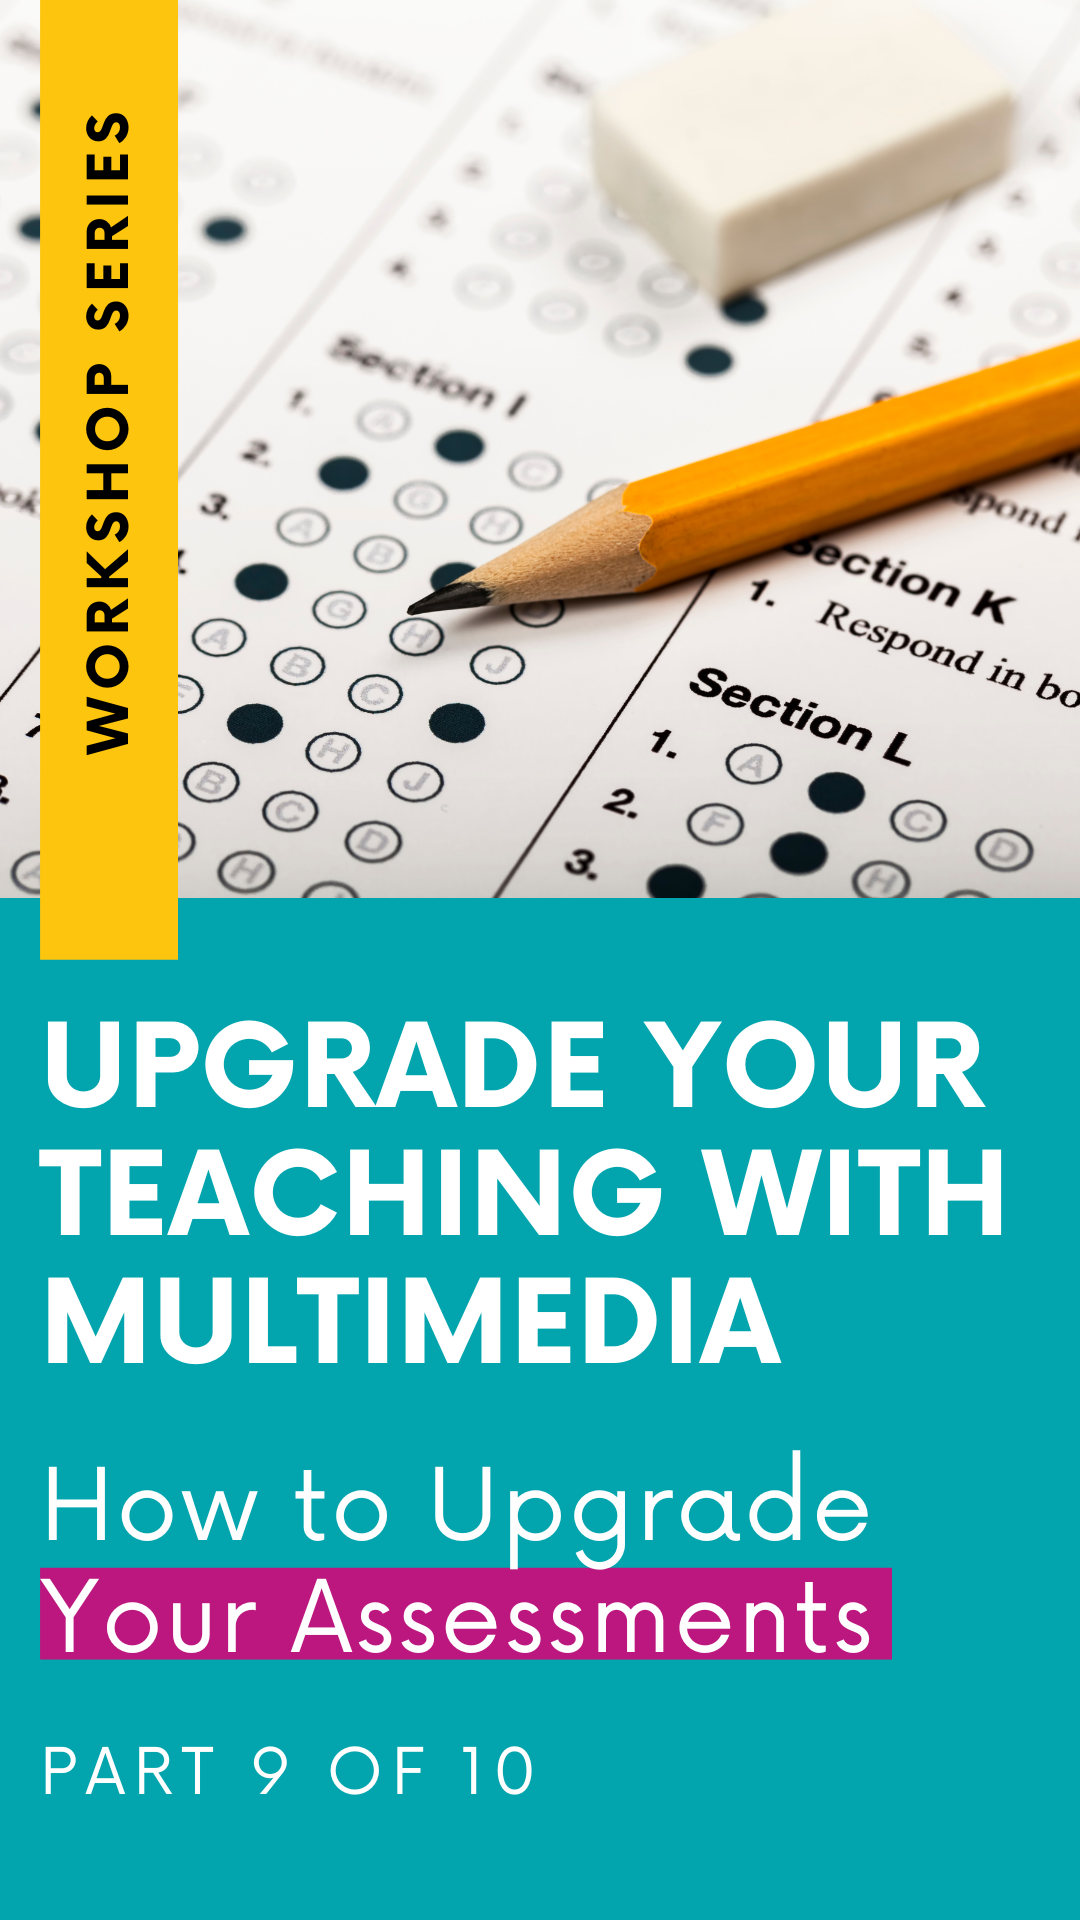 Upgrade Your Assessments - (From the Upgrade Your Teaching with Multimedia Workshop Series: Part 9) (Copy)